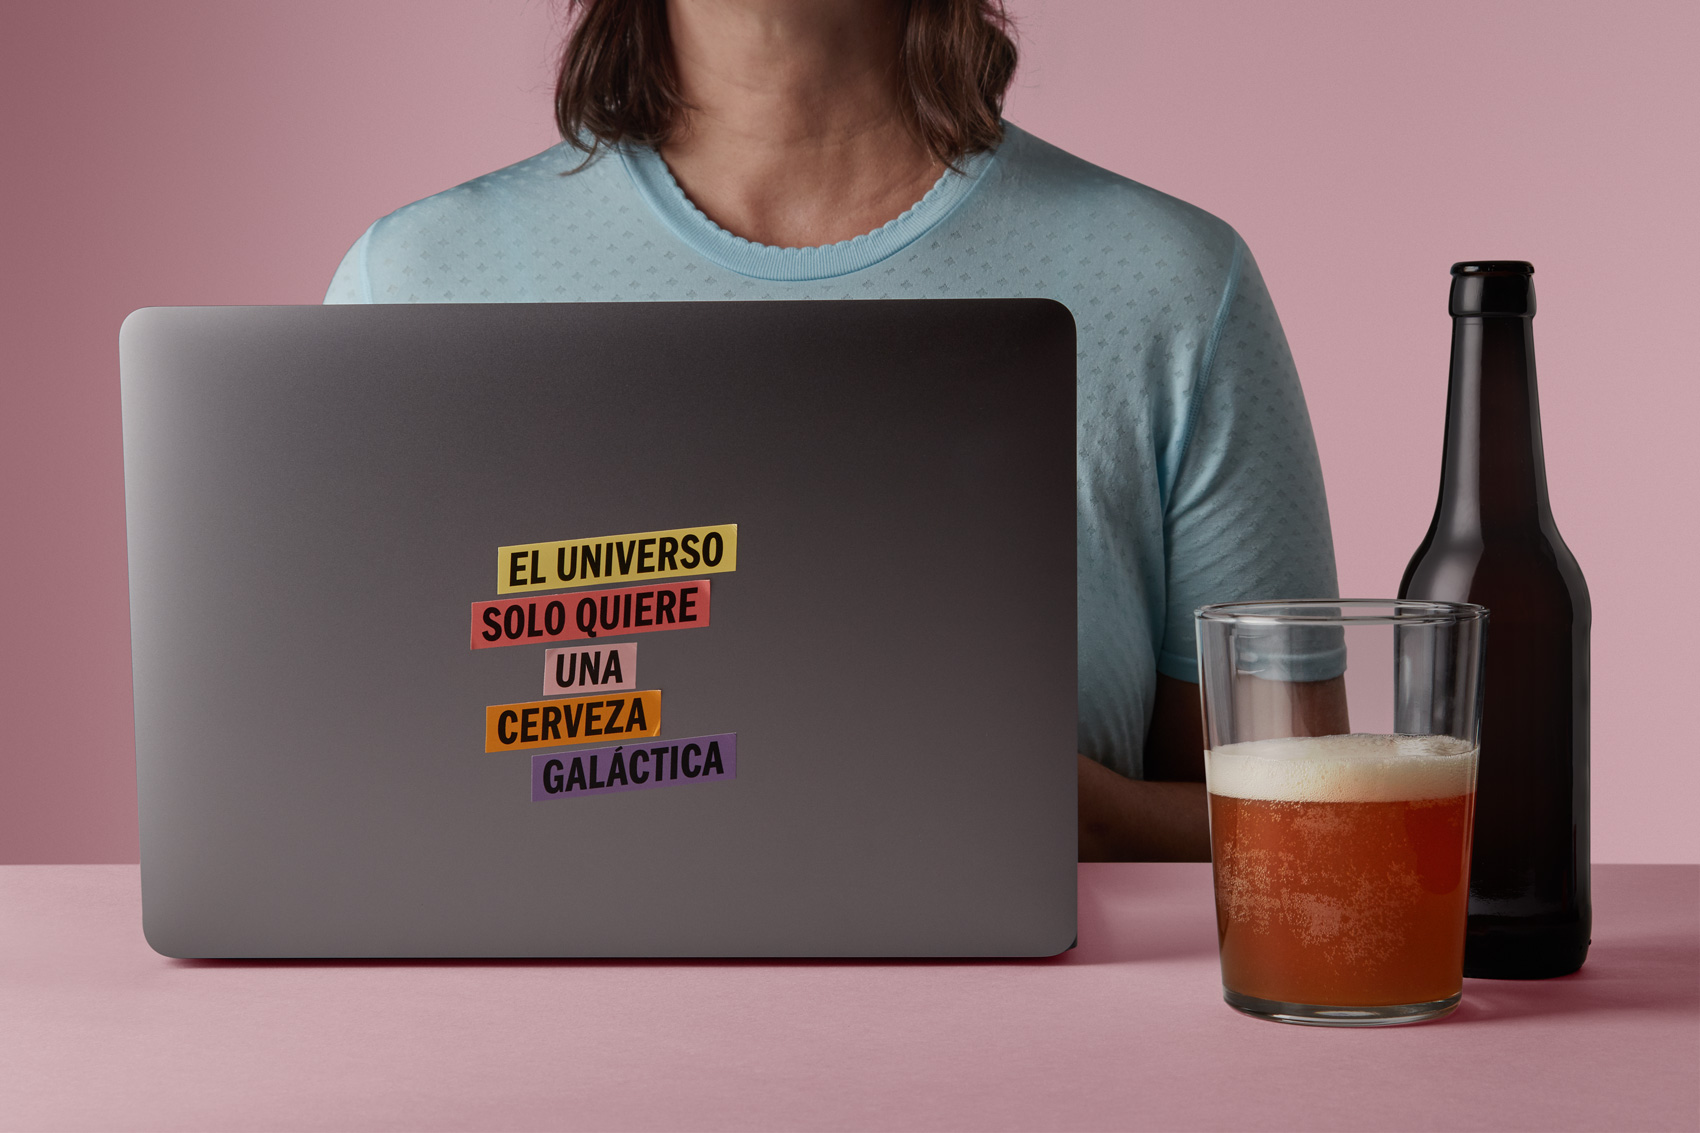 Example of creative copywriting on packaging for Vibranding's self-promotion campaign, Una Cerveza